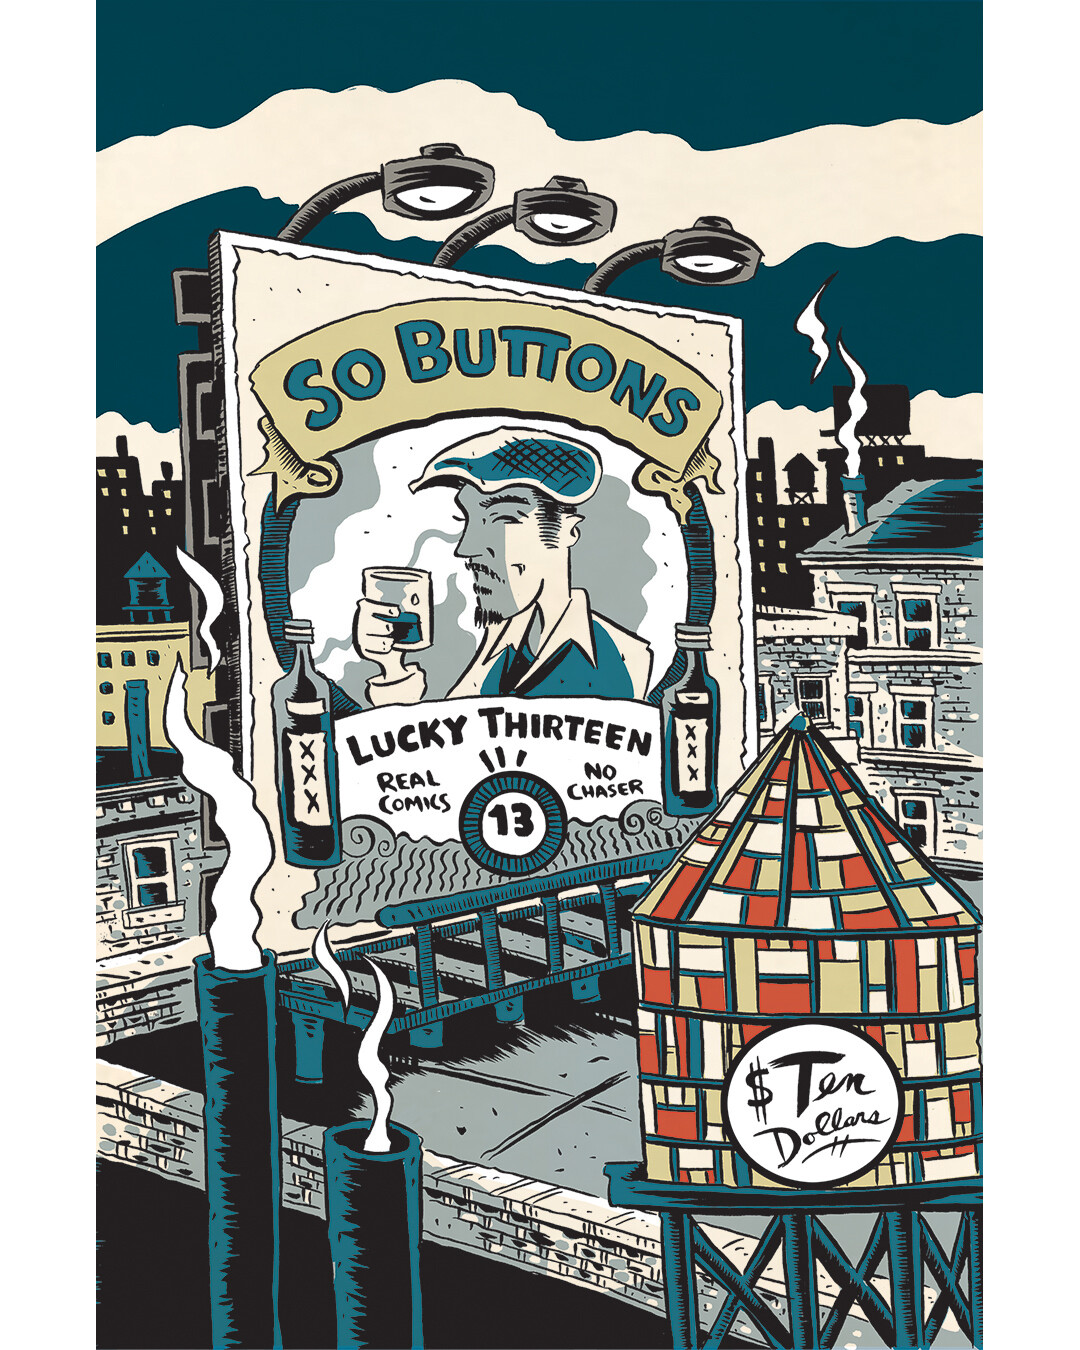 So Buttons 13, cover by Karl Christian Krumpholz